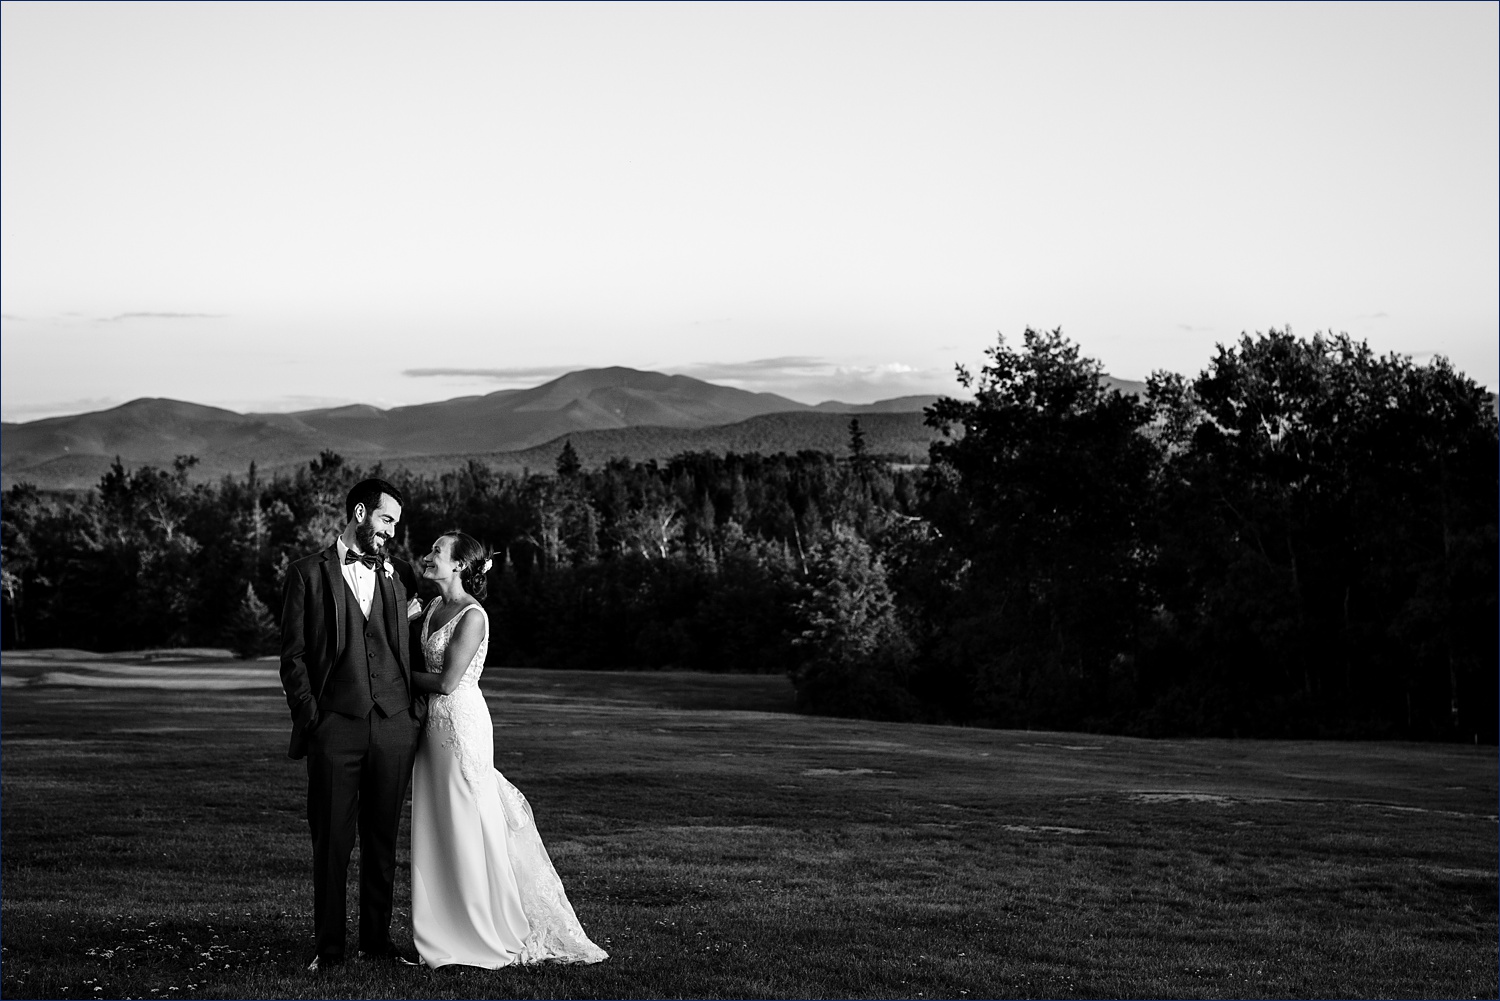 The newlyweds in front of the White Mountains in Whitefield New Hampshire